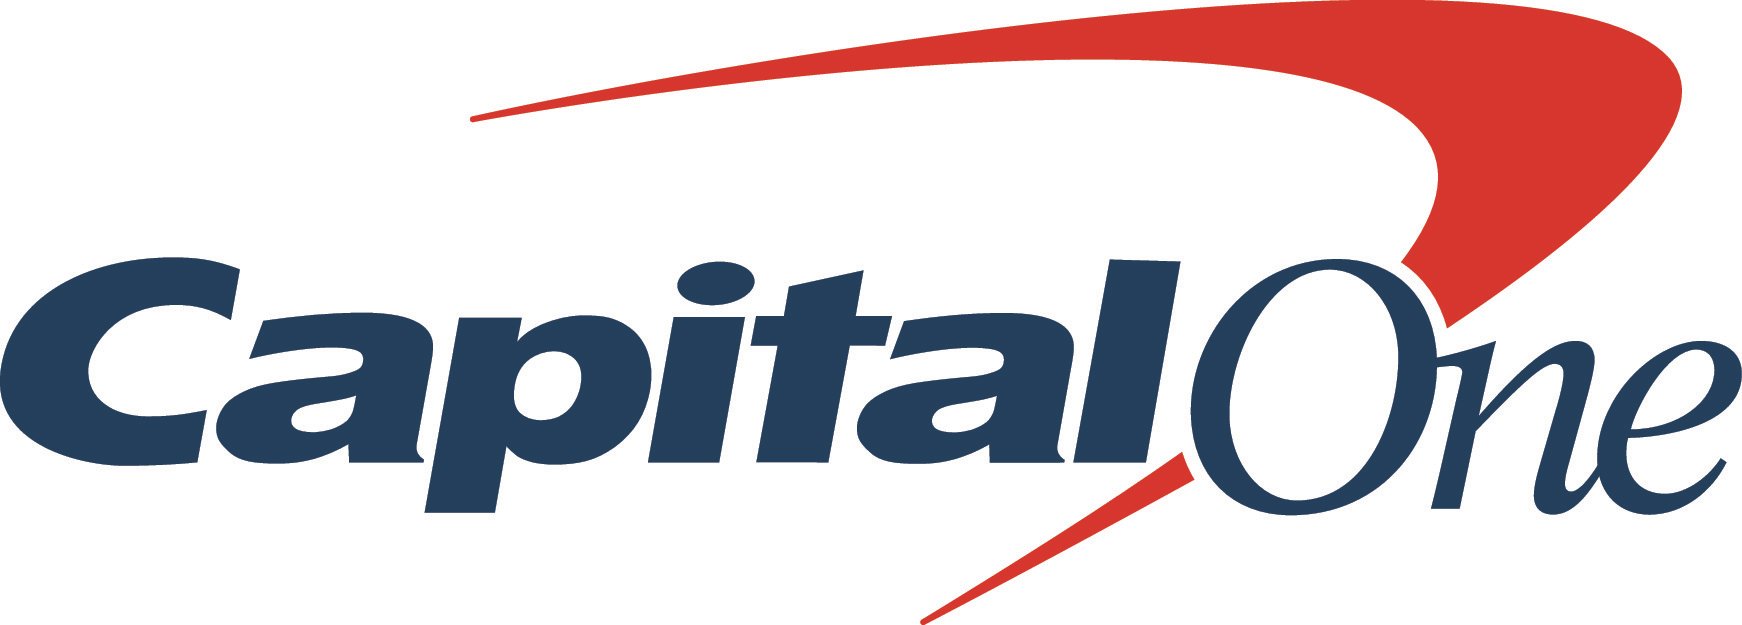 Capital One Overall Star Rating